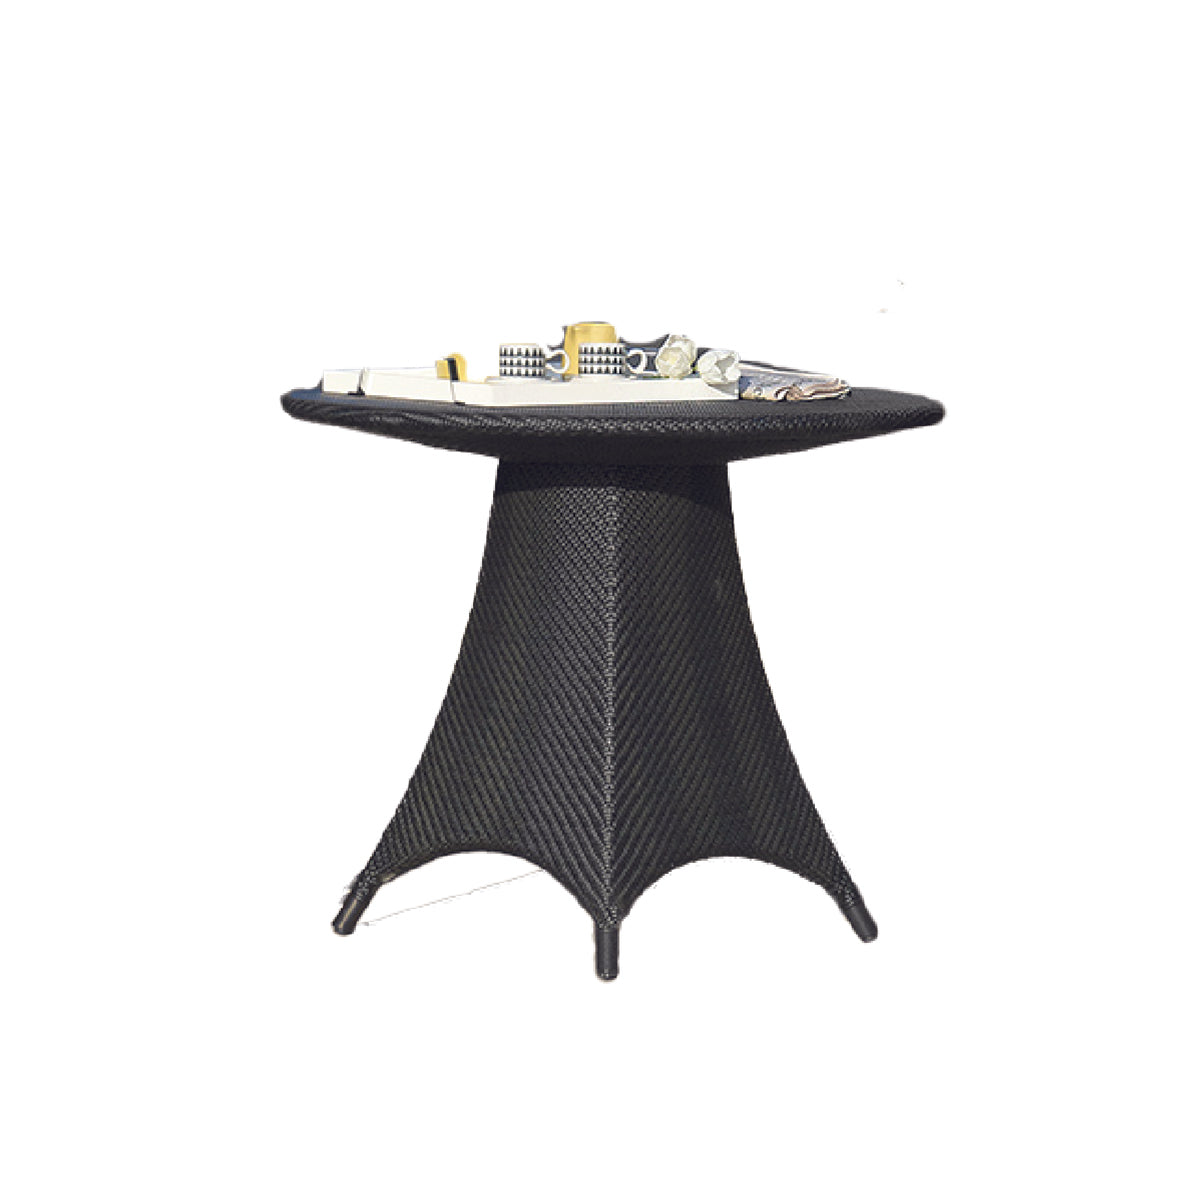 Wing Design Balcony Set with Table in Wicker <br> VDC 631